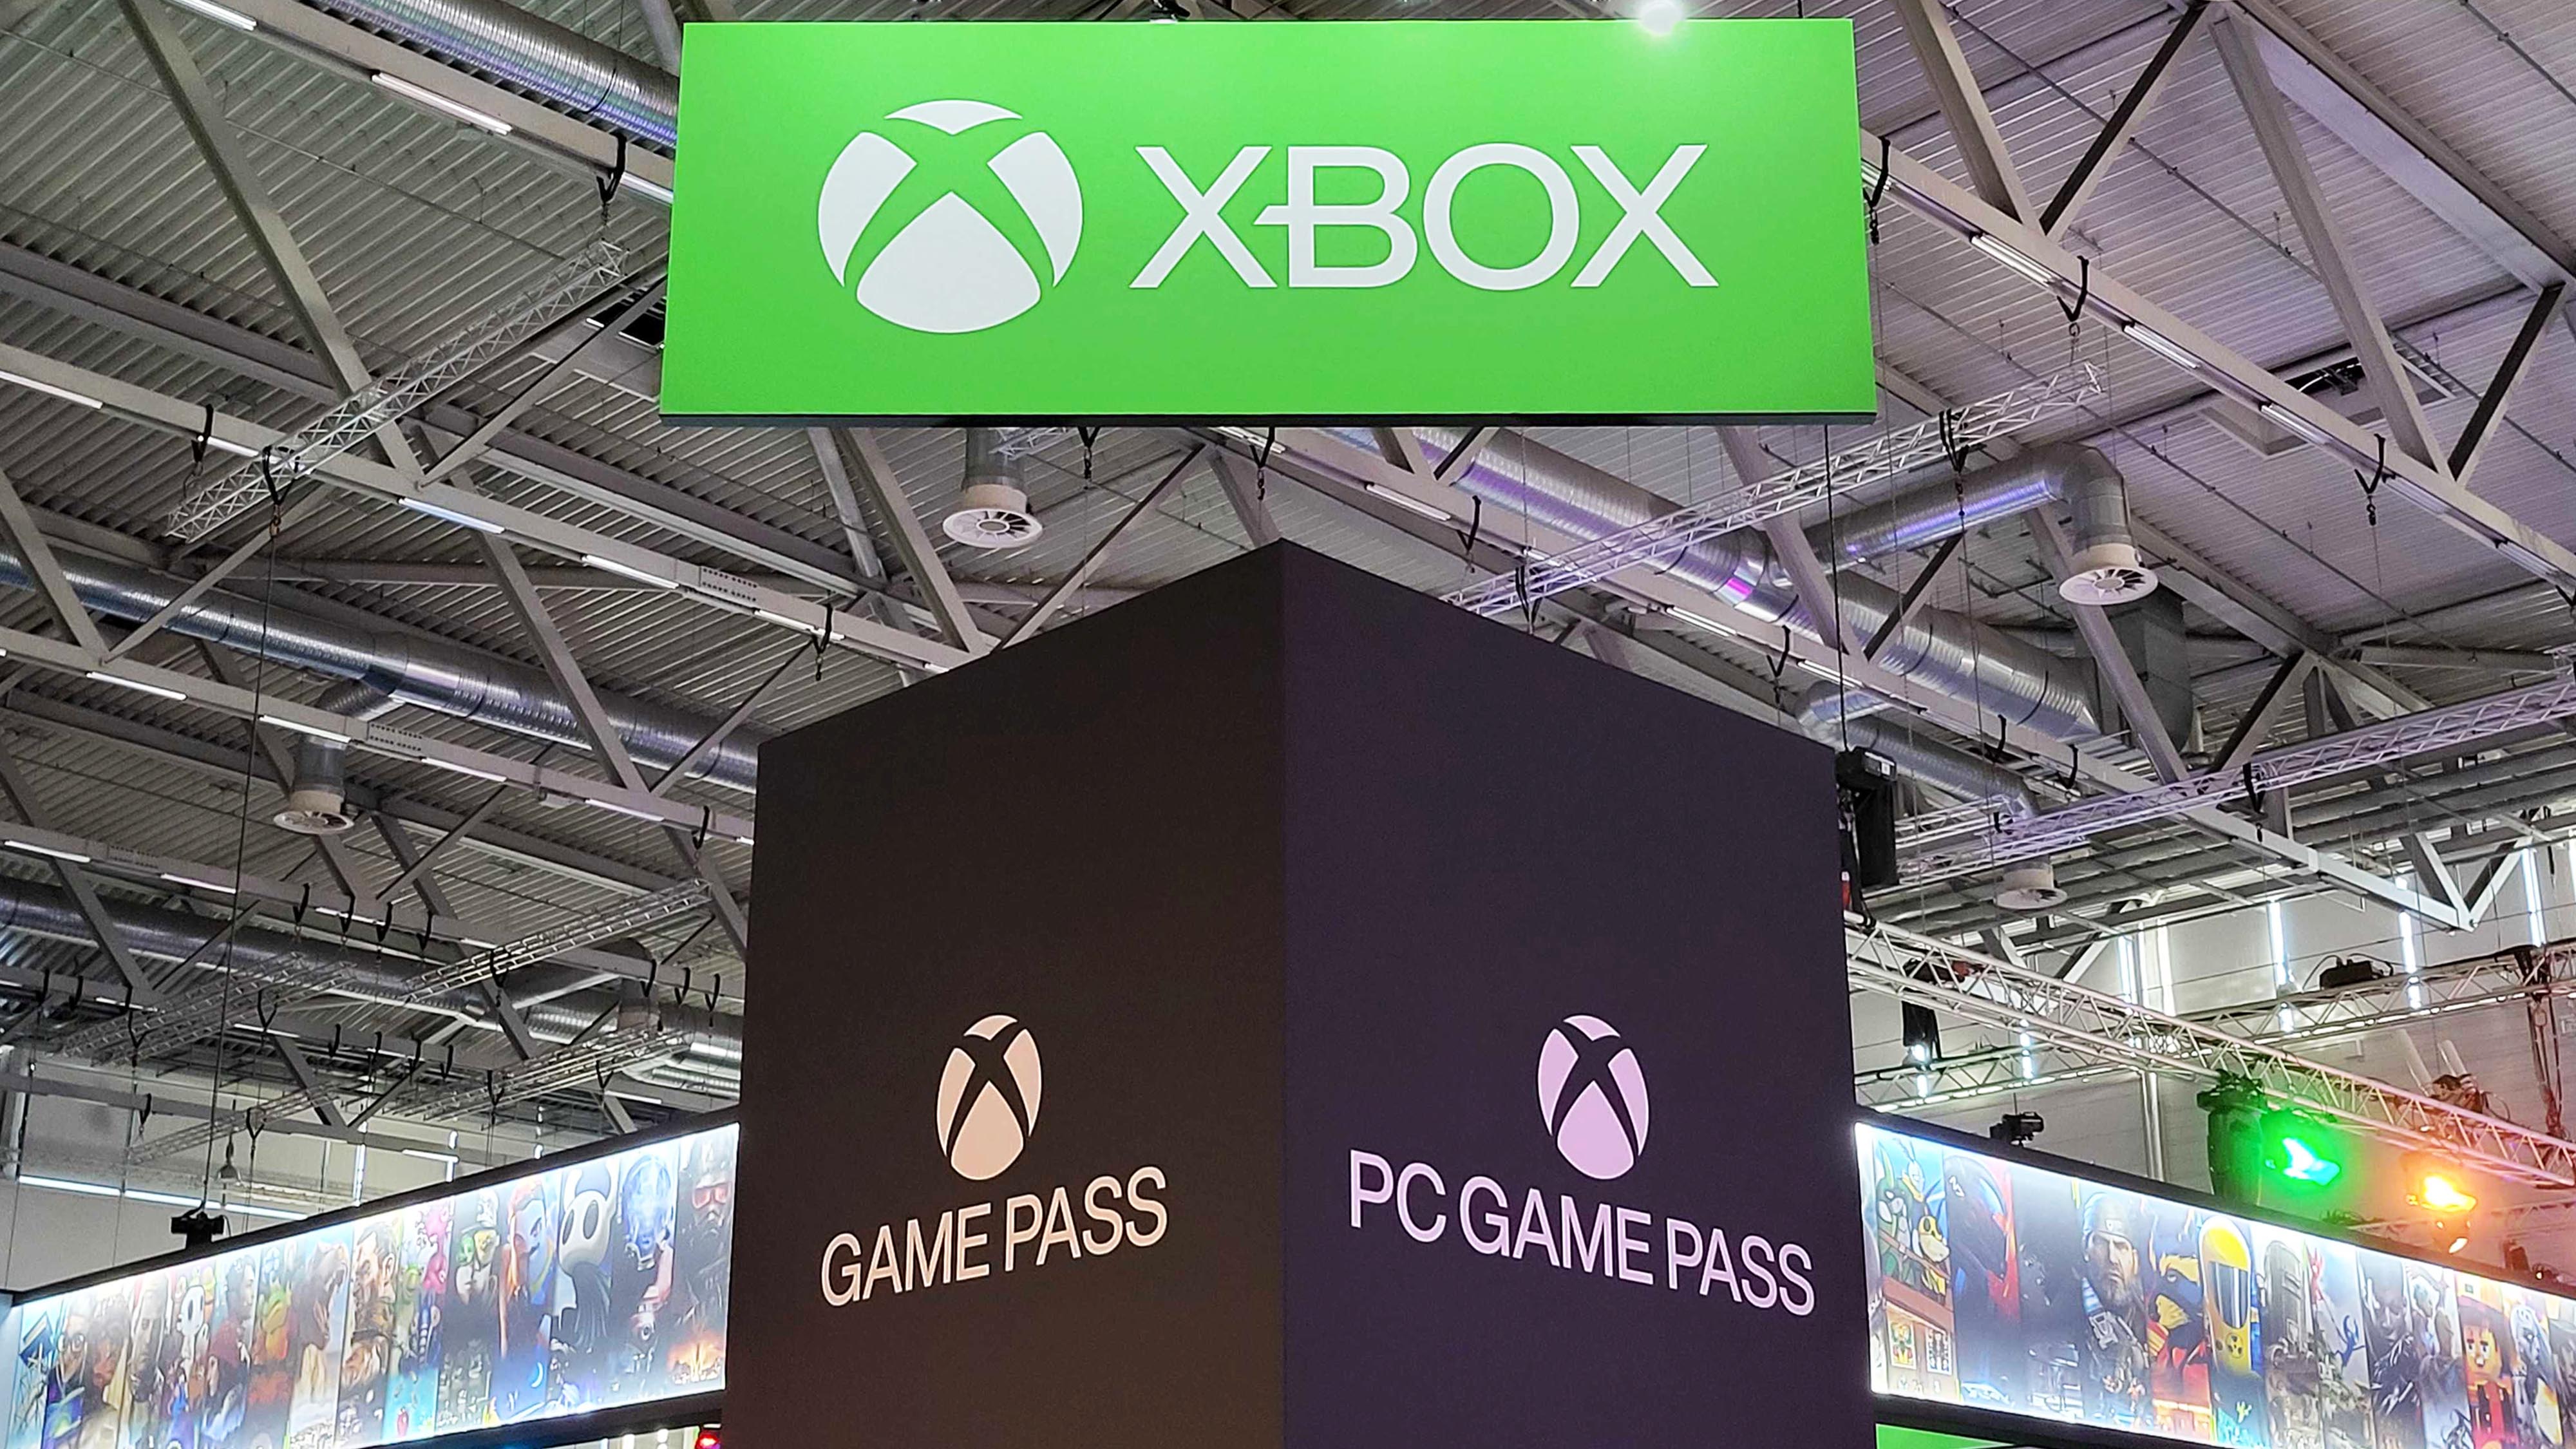 Microsoft Officially Confirms Friends & Family Plan for Xbox Game Pass